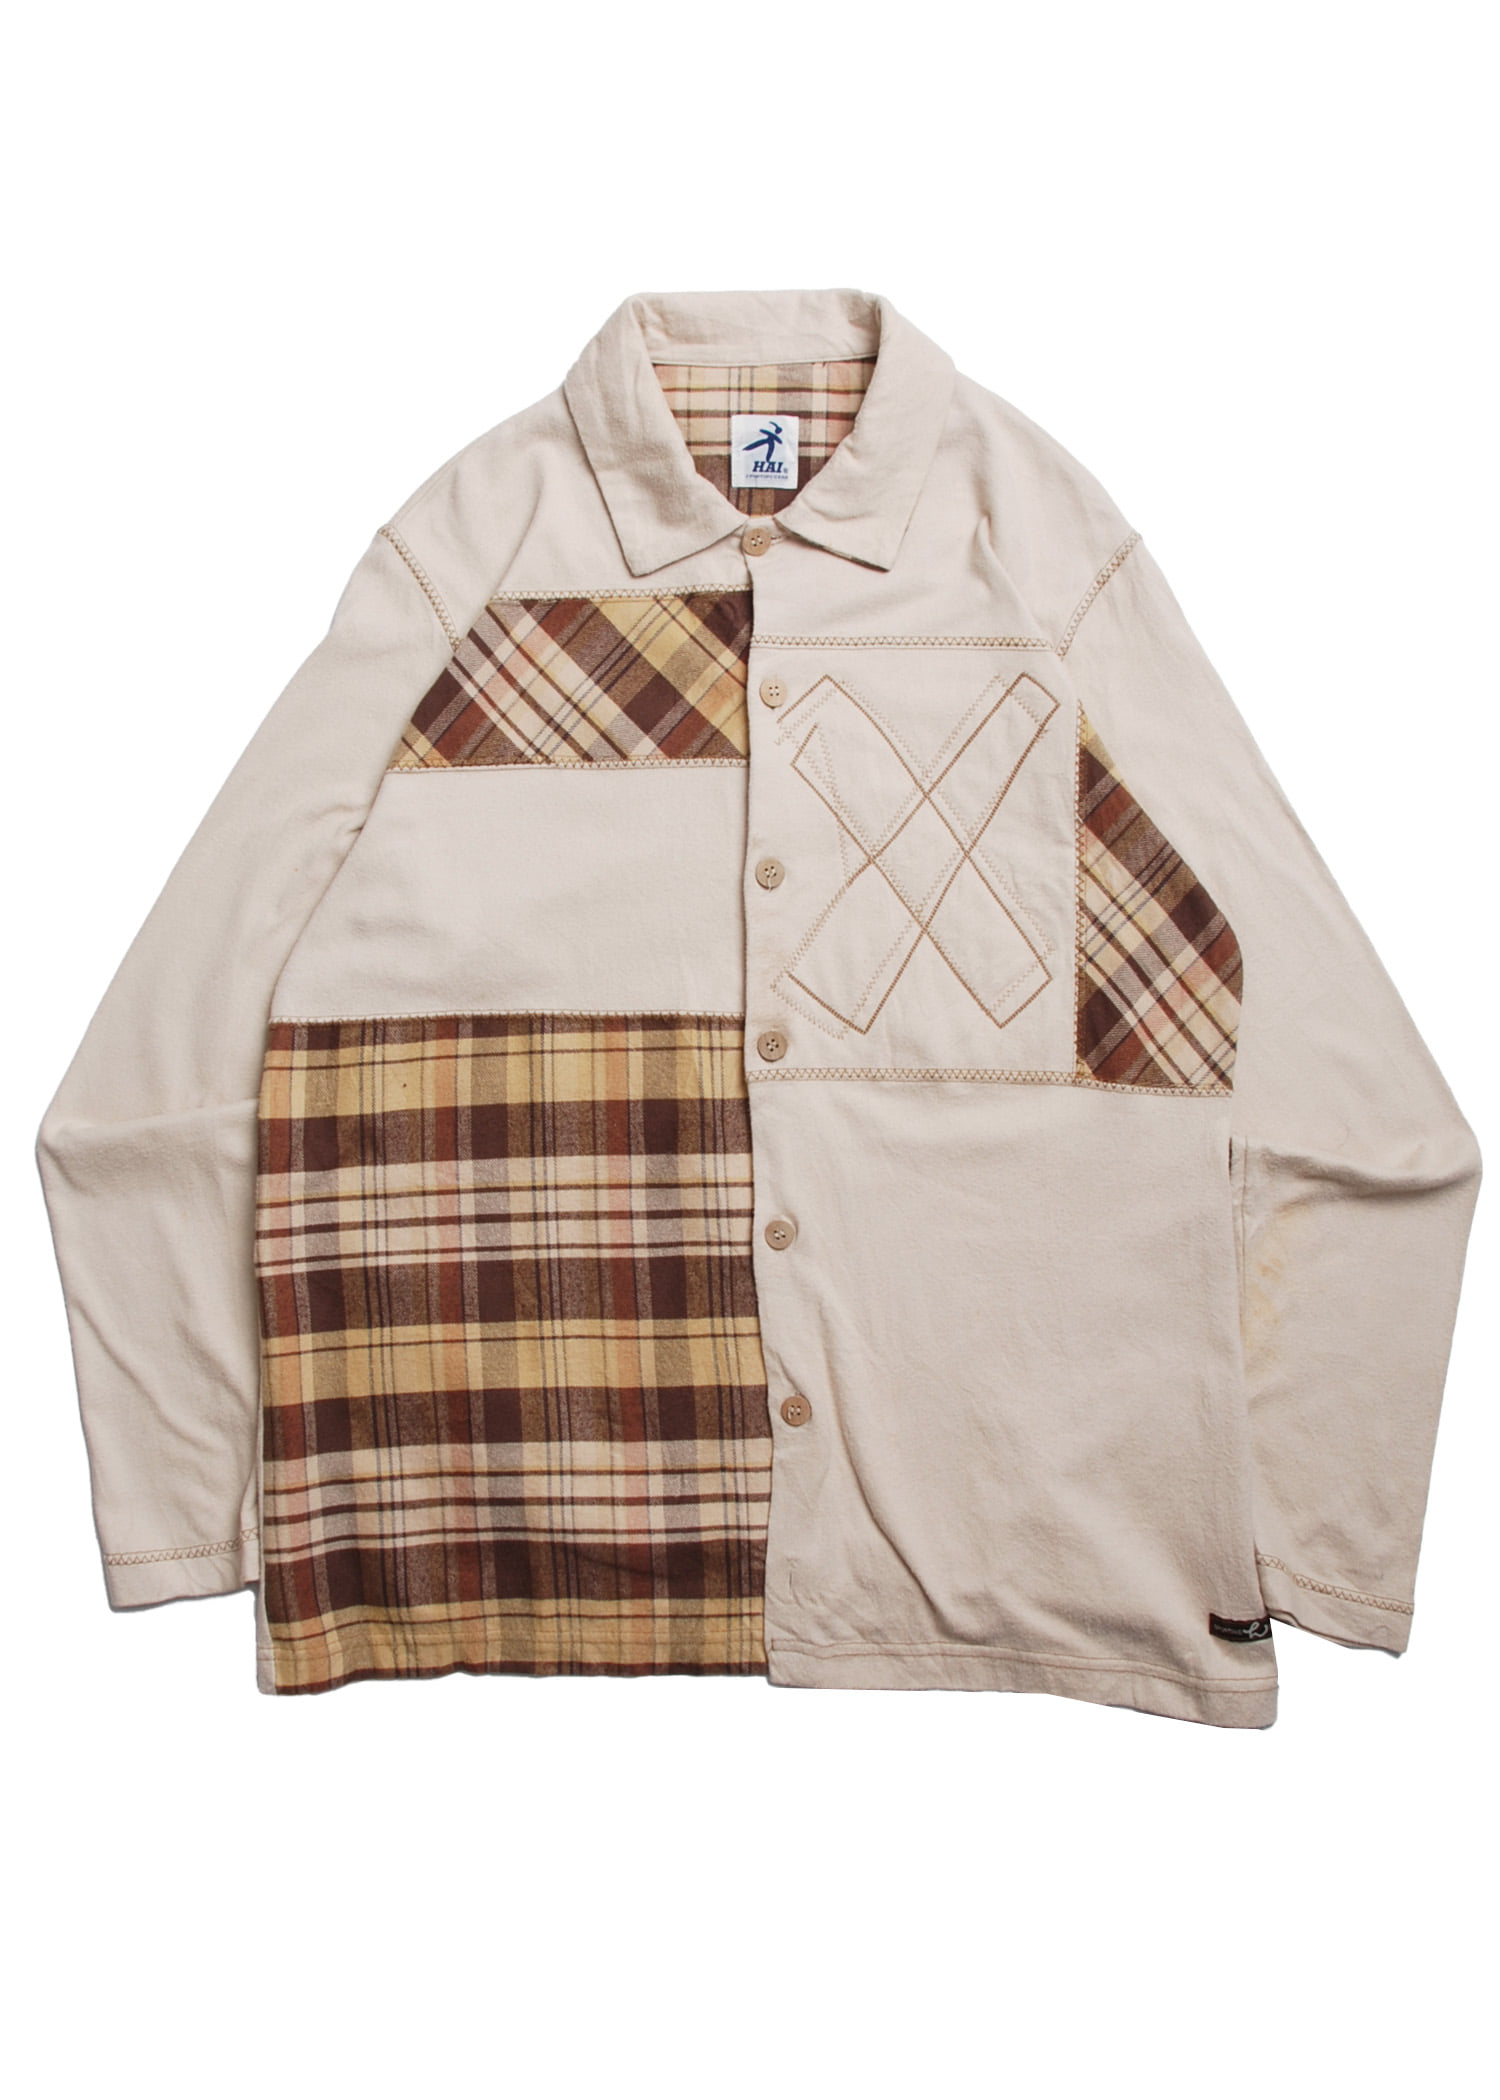 HAI sporting gear by ISSEY MIYAKE patchwork shirts